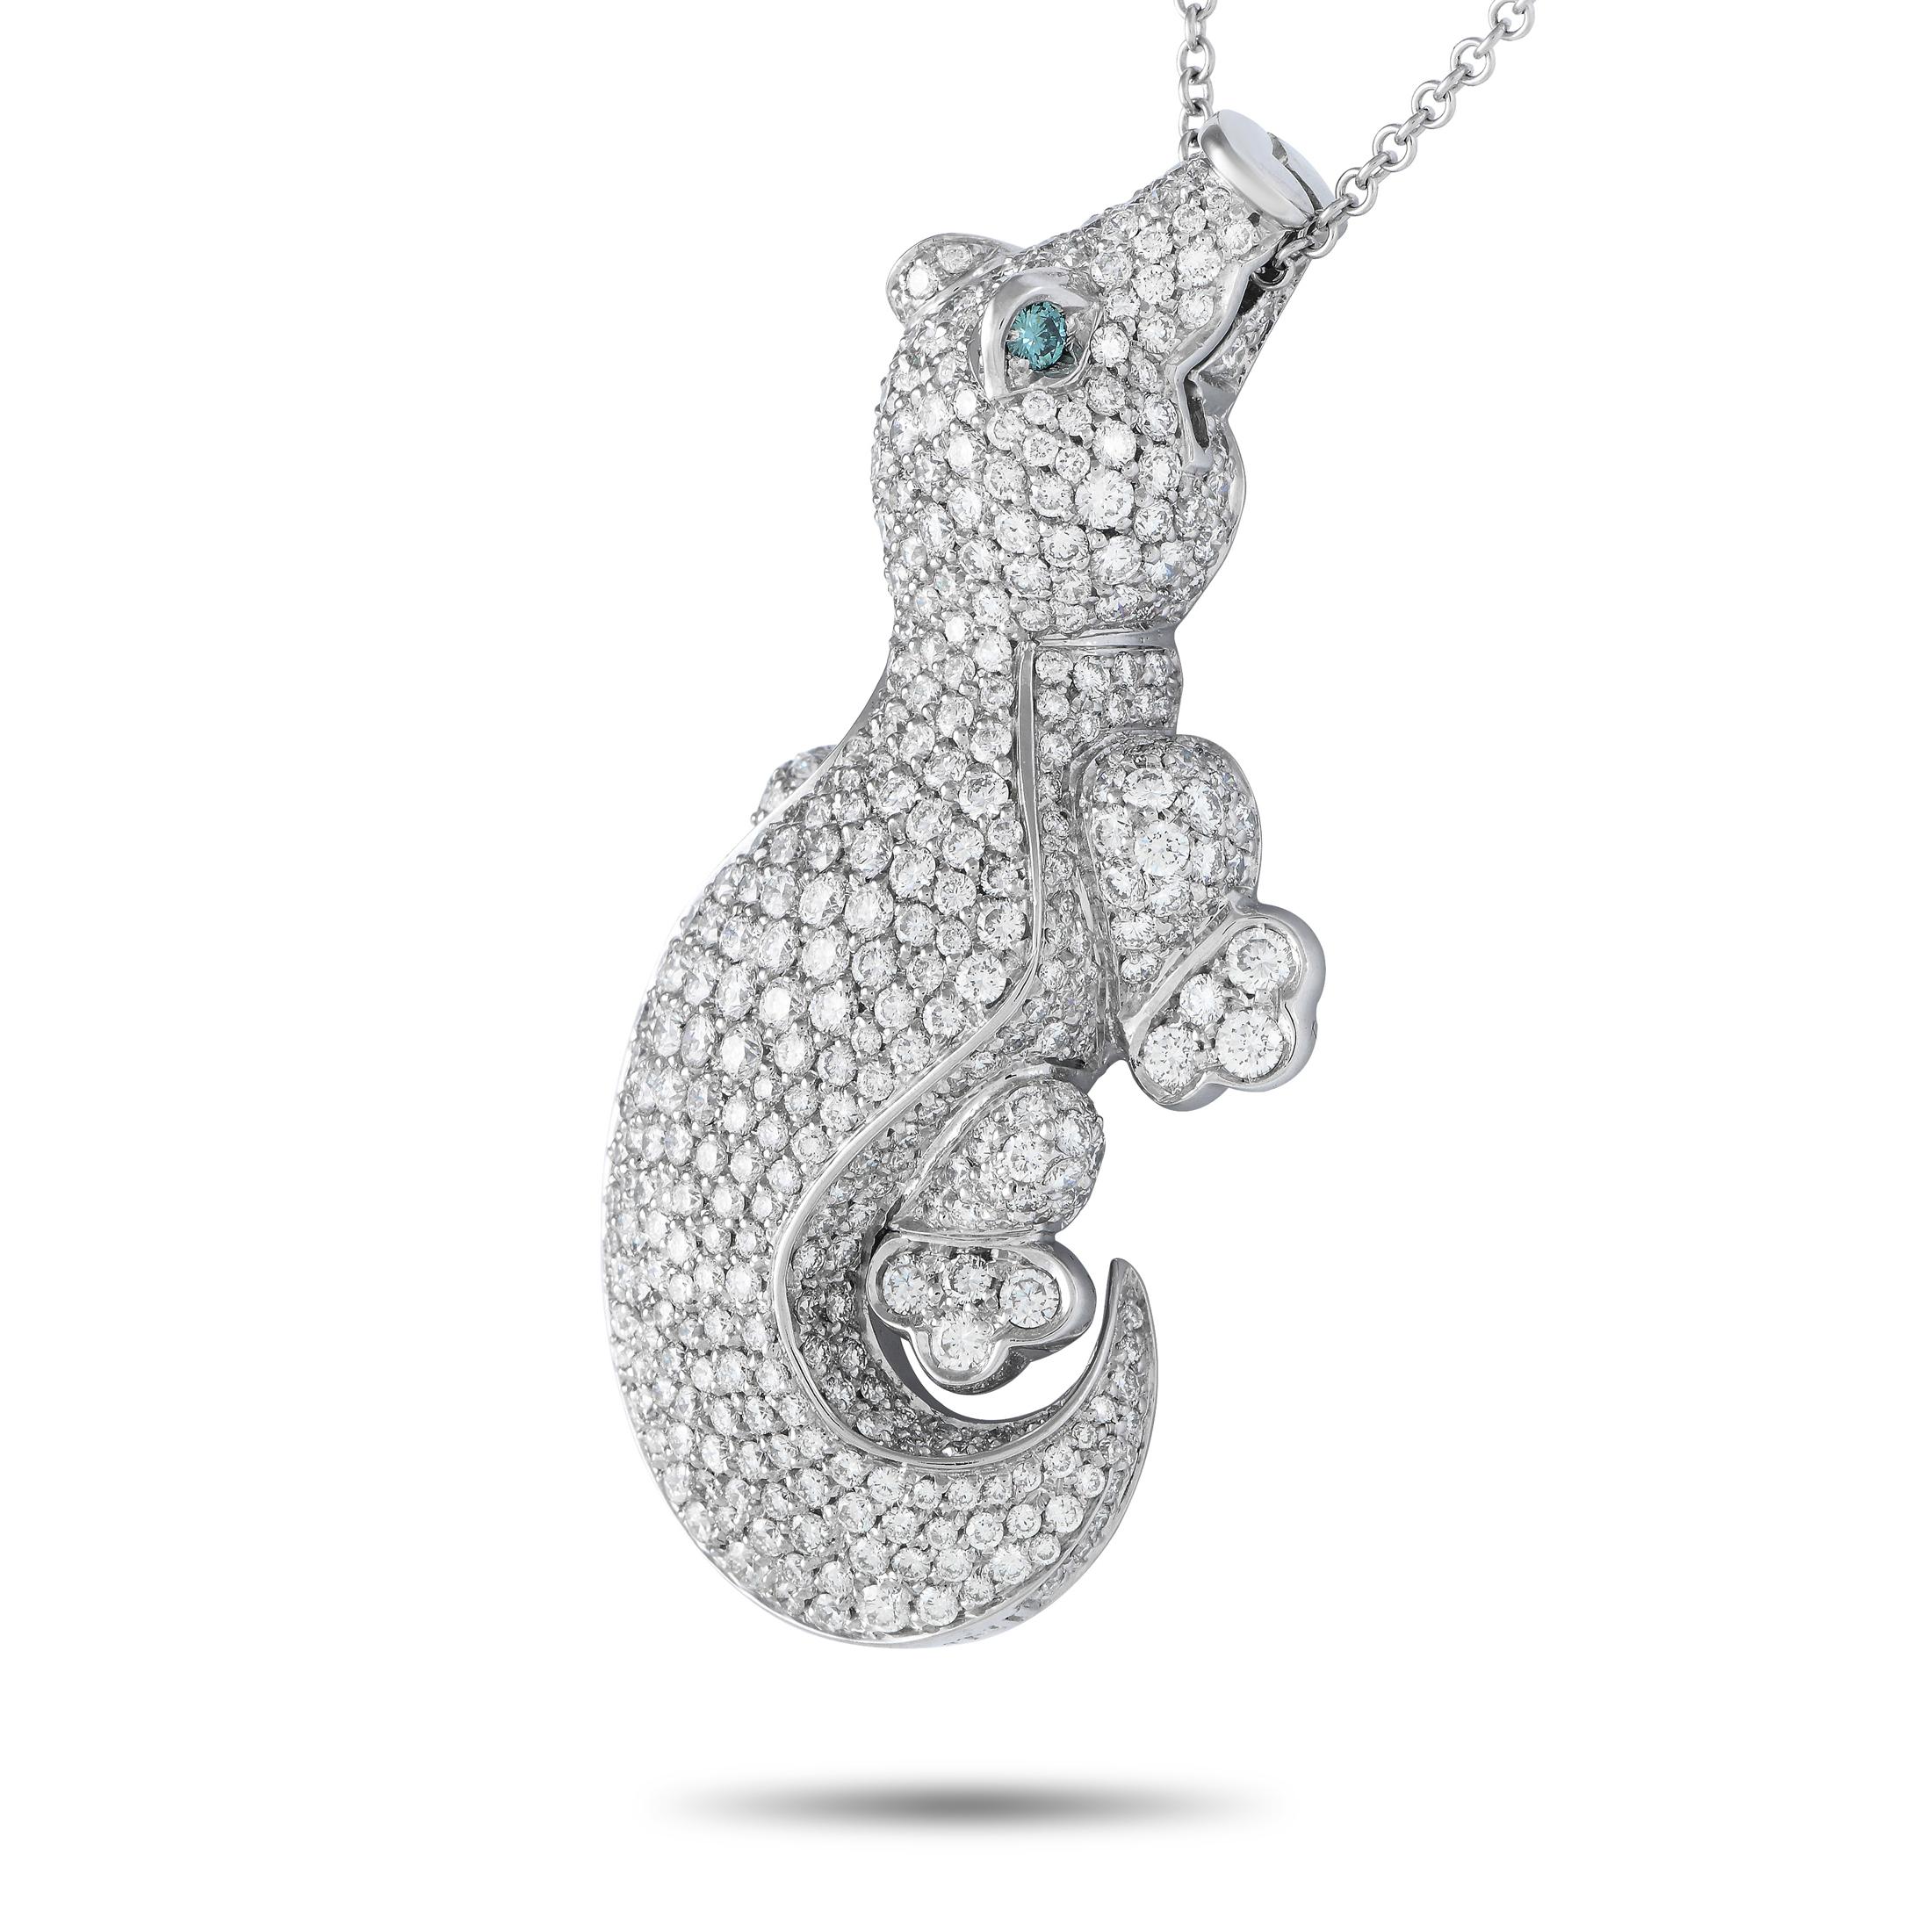 A captivating crocodile-shaped pendant makes this Pasquale Bruni necklace simply unforgettable. The 18K white gold pendant – which measures 2.10” long by 1.0” wide – is covered in 7.14 carats of sparkling diamonds and is suspended from a 28.0”